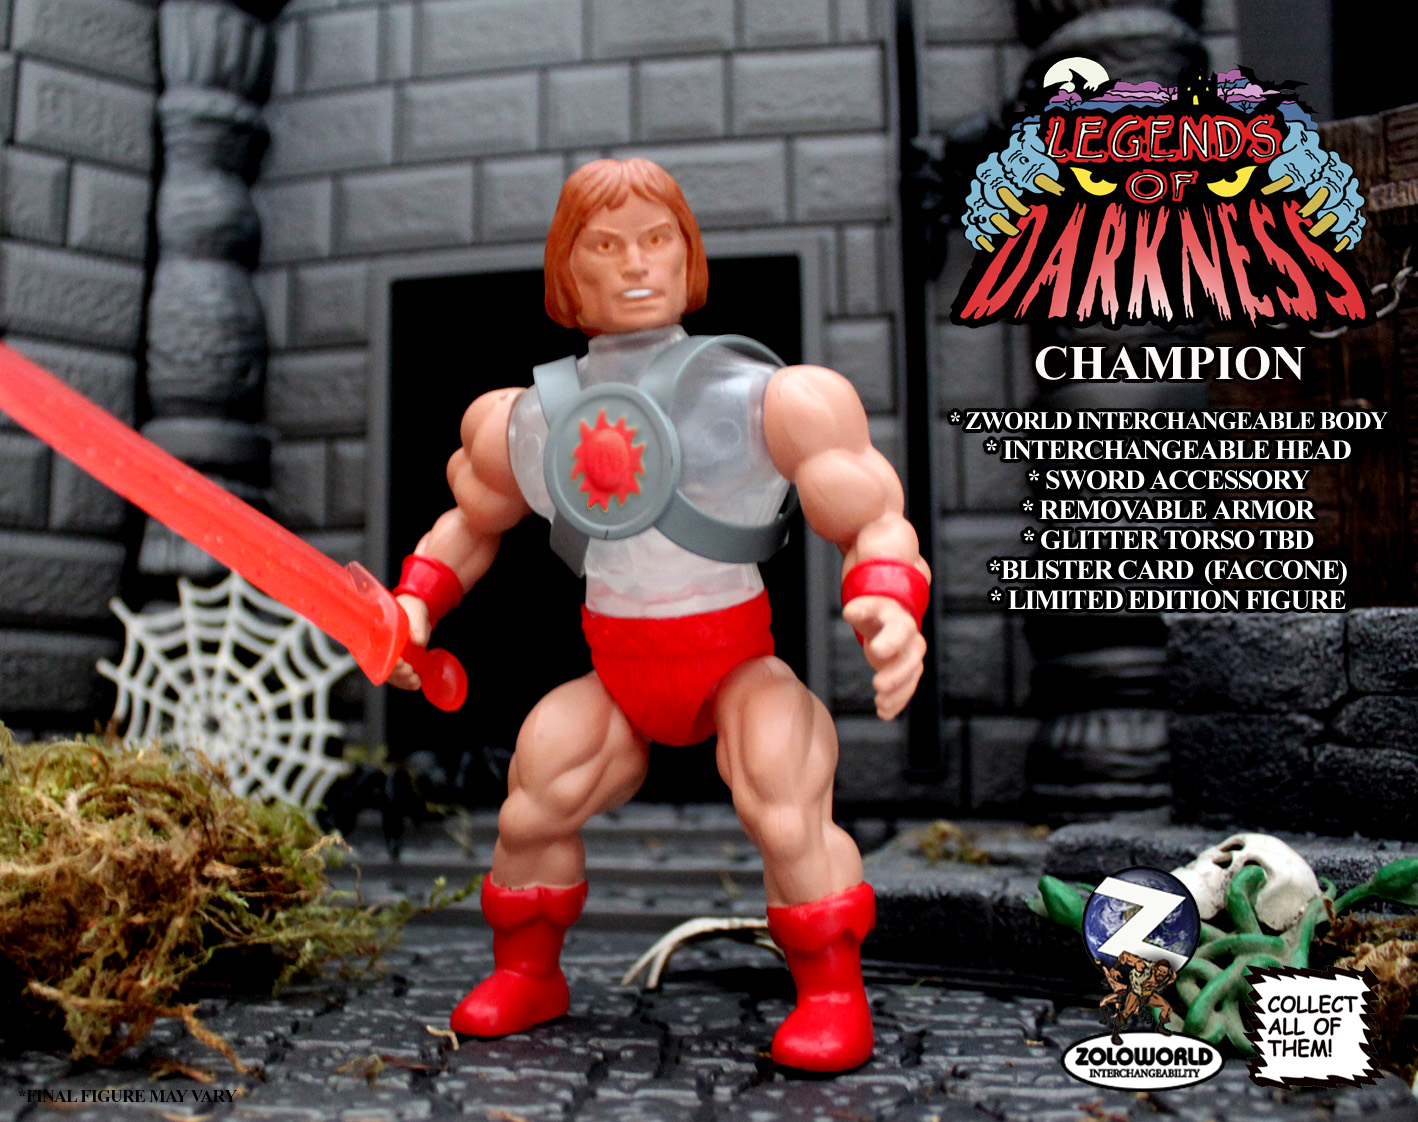 LEGENDS OF DARKNESS CHAMPION HERO FIGURE - Click Image to Close